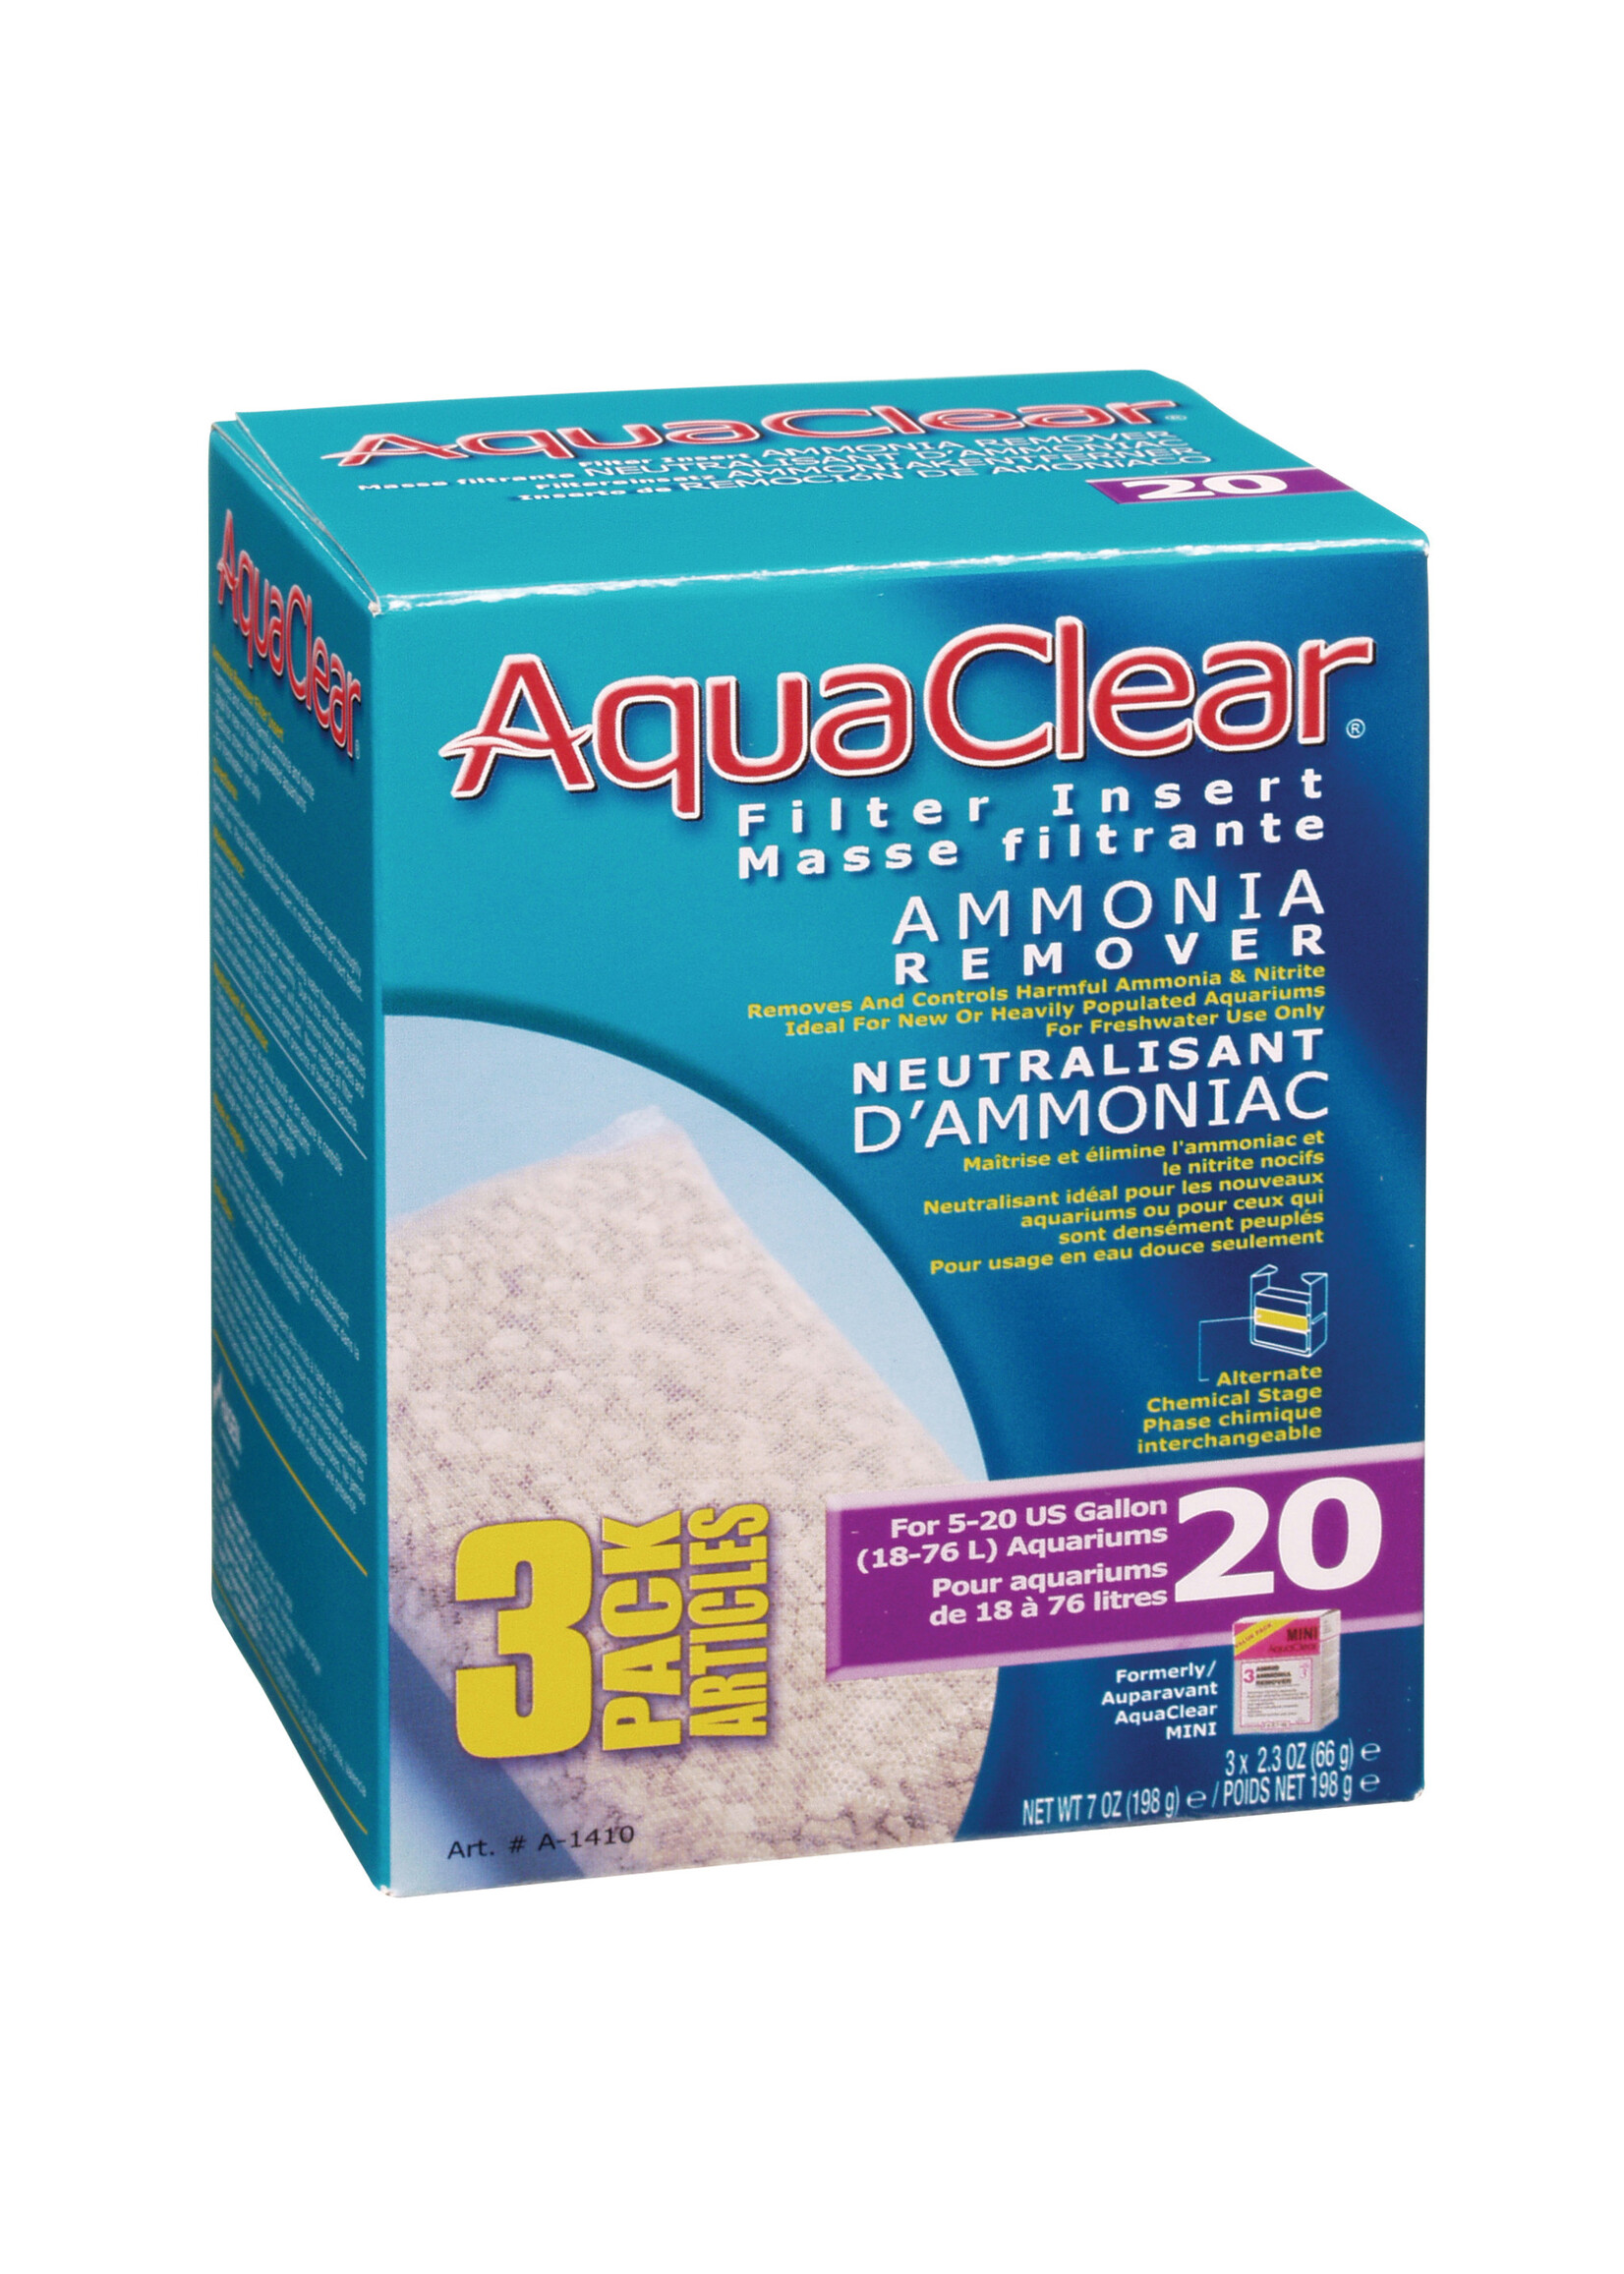 AquaClear AMMONIA REMOVER 20 3 PACK